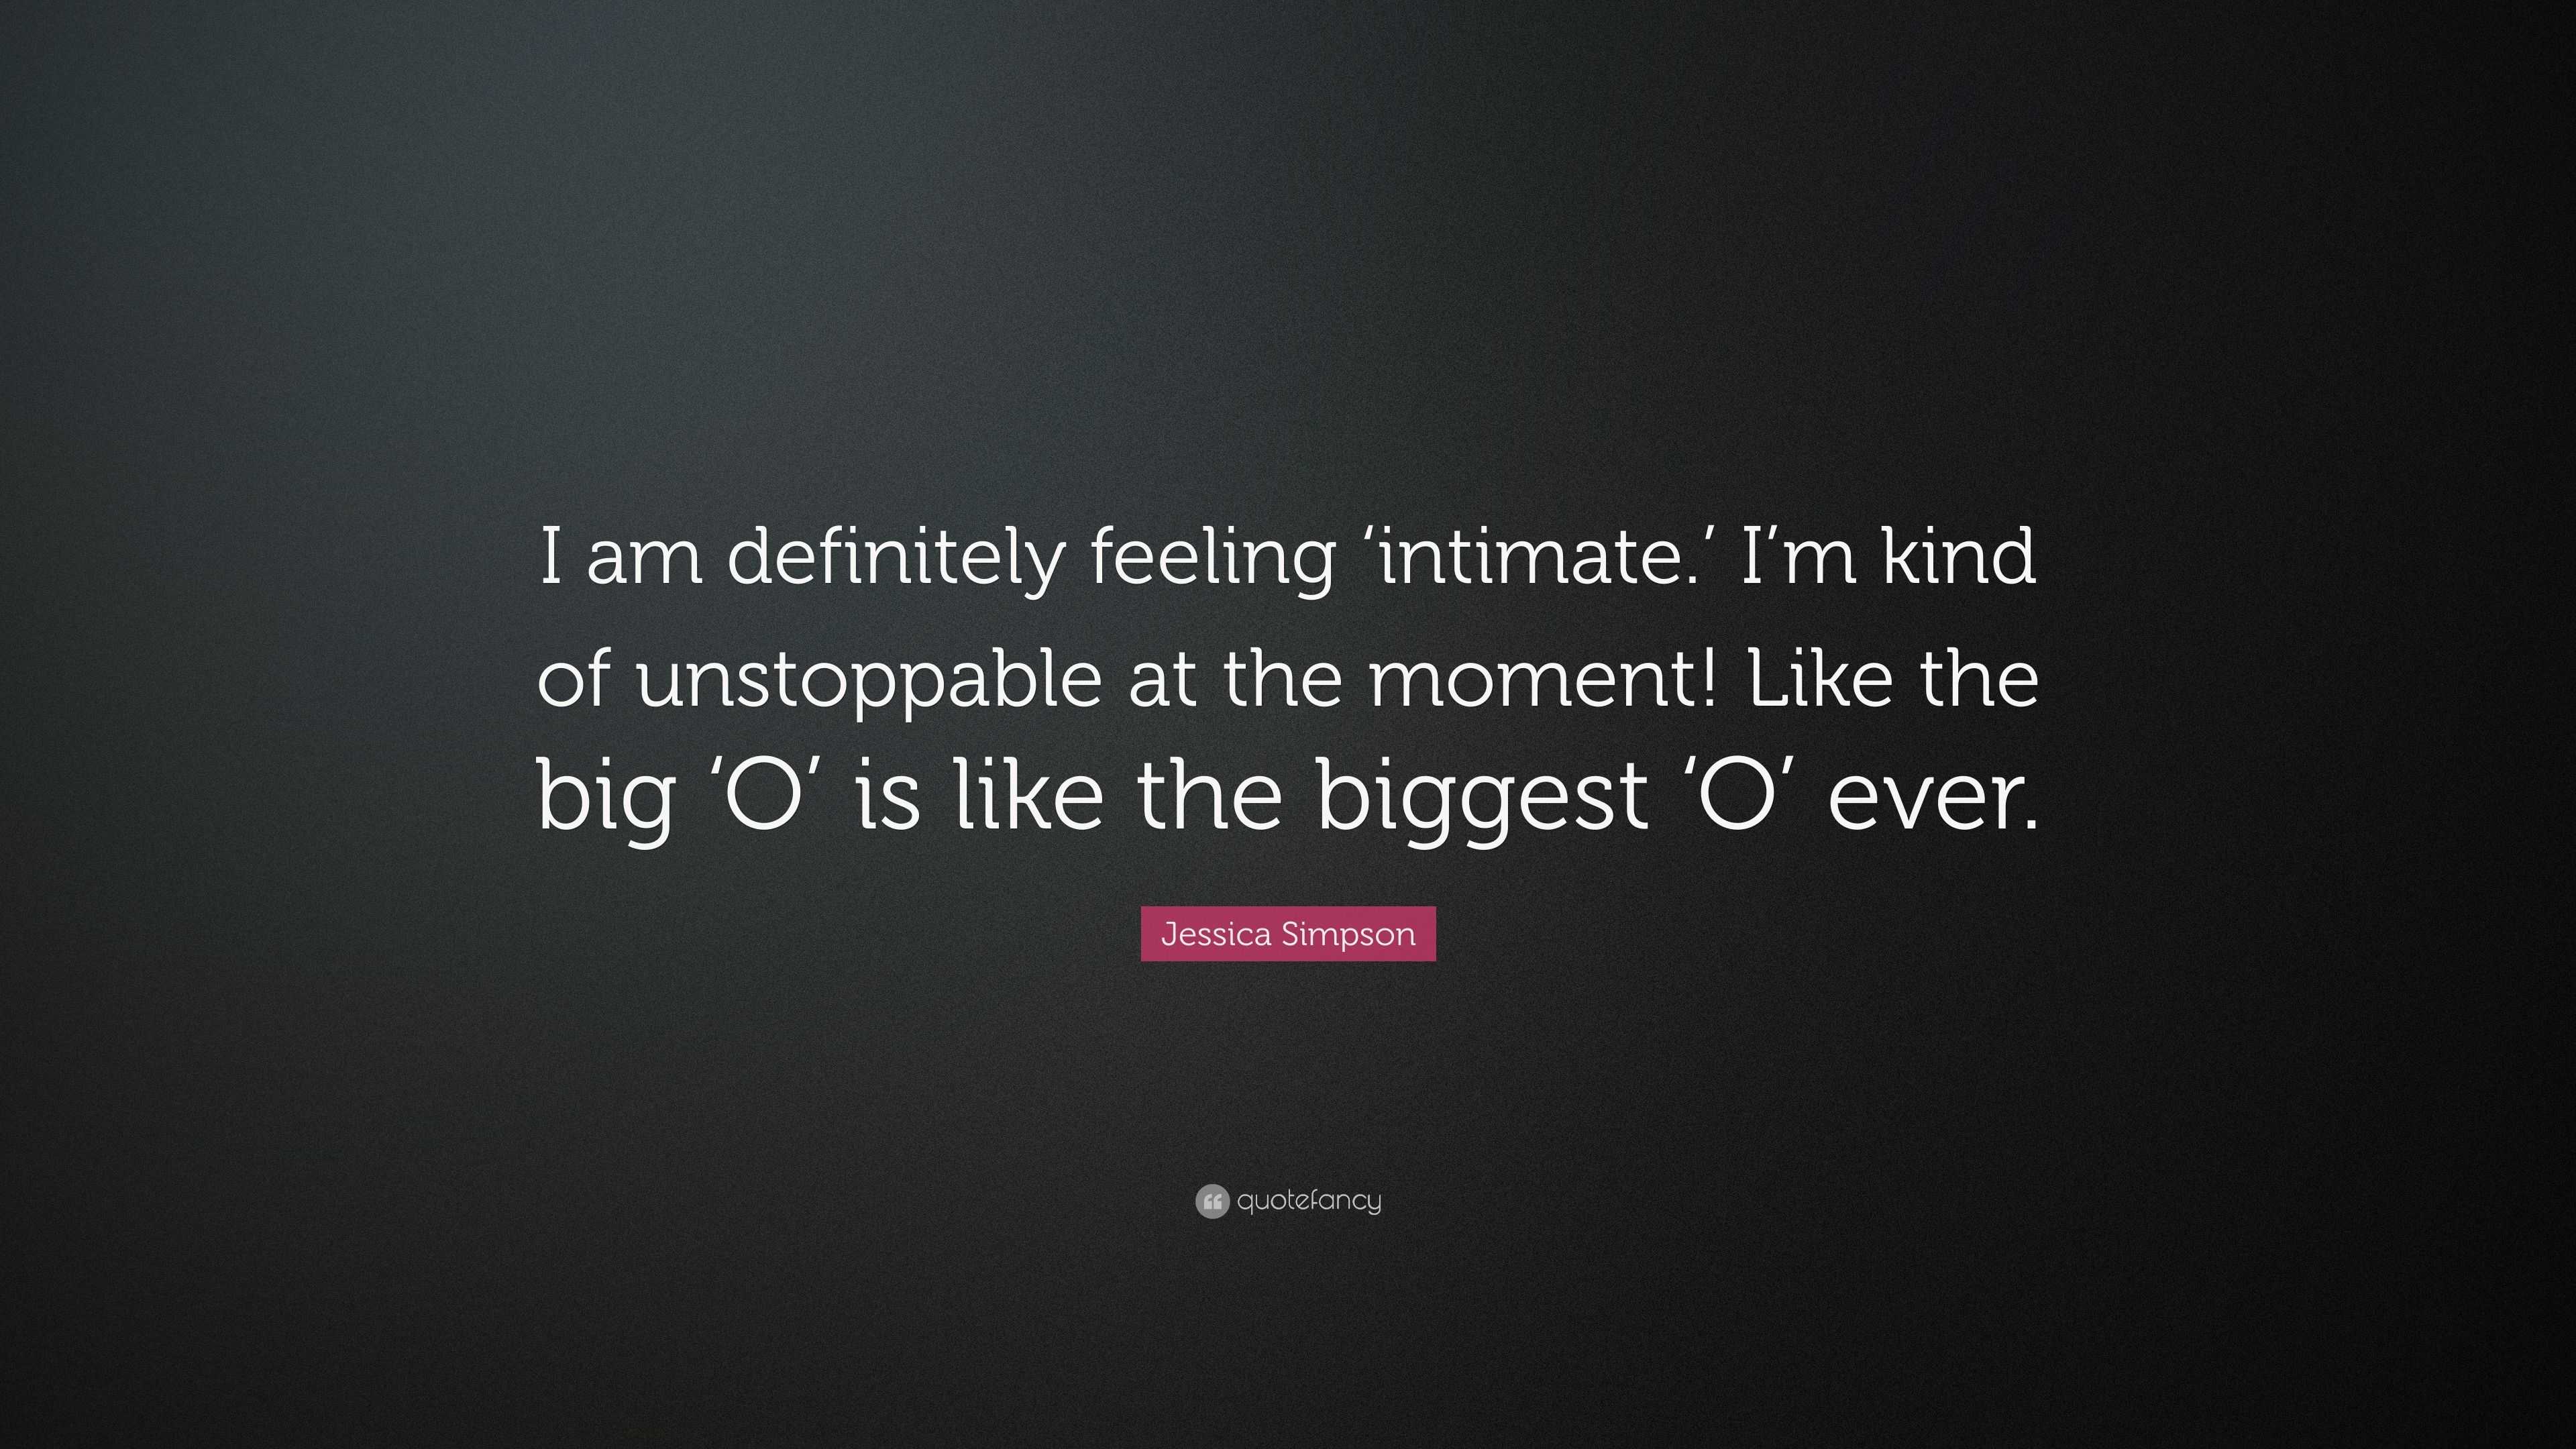 Jessica Simpson Quote: “I am definitely feeling 'intimate.' I'm kind of  unstoppable at the moment! Like the big 'O' is like the biggest 'O' ever”